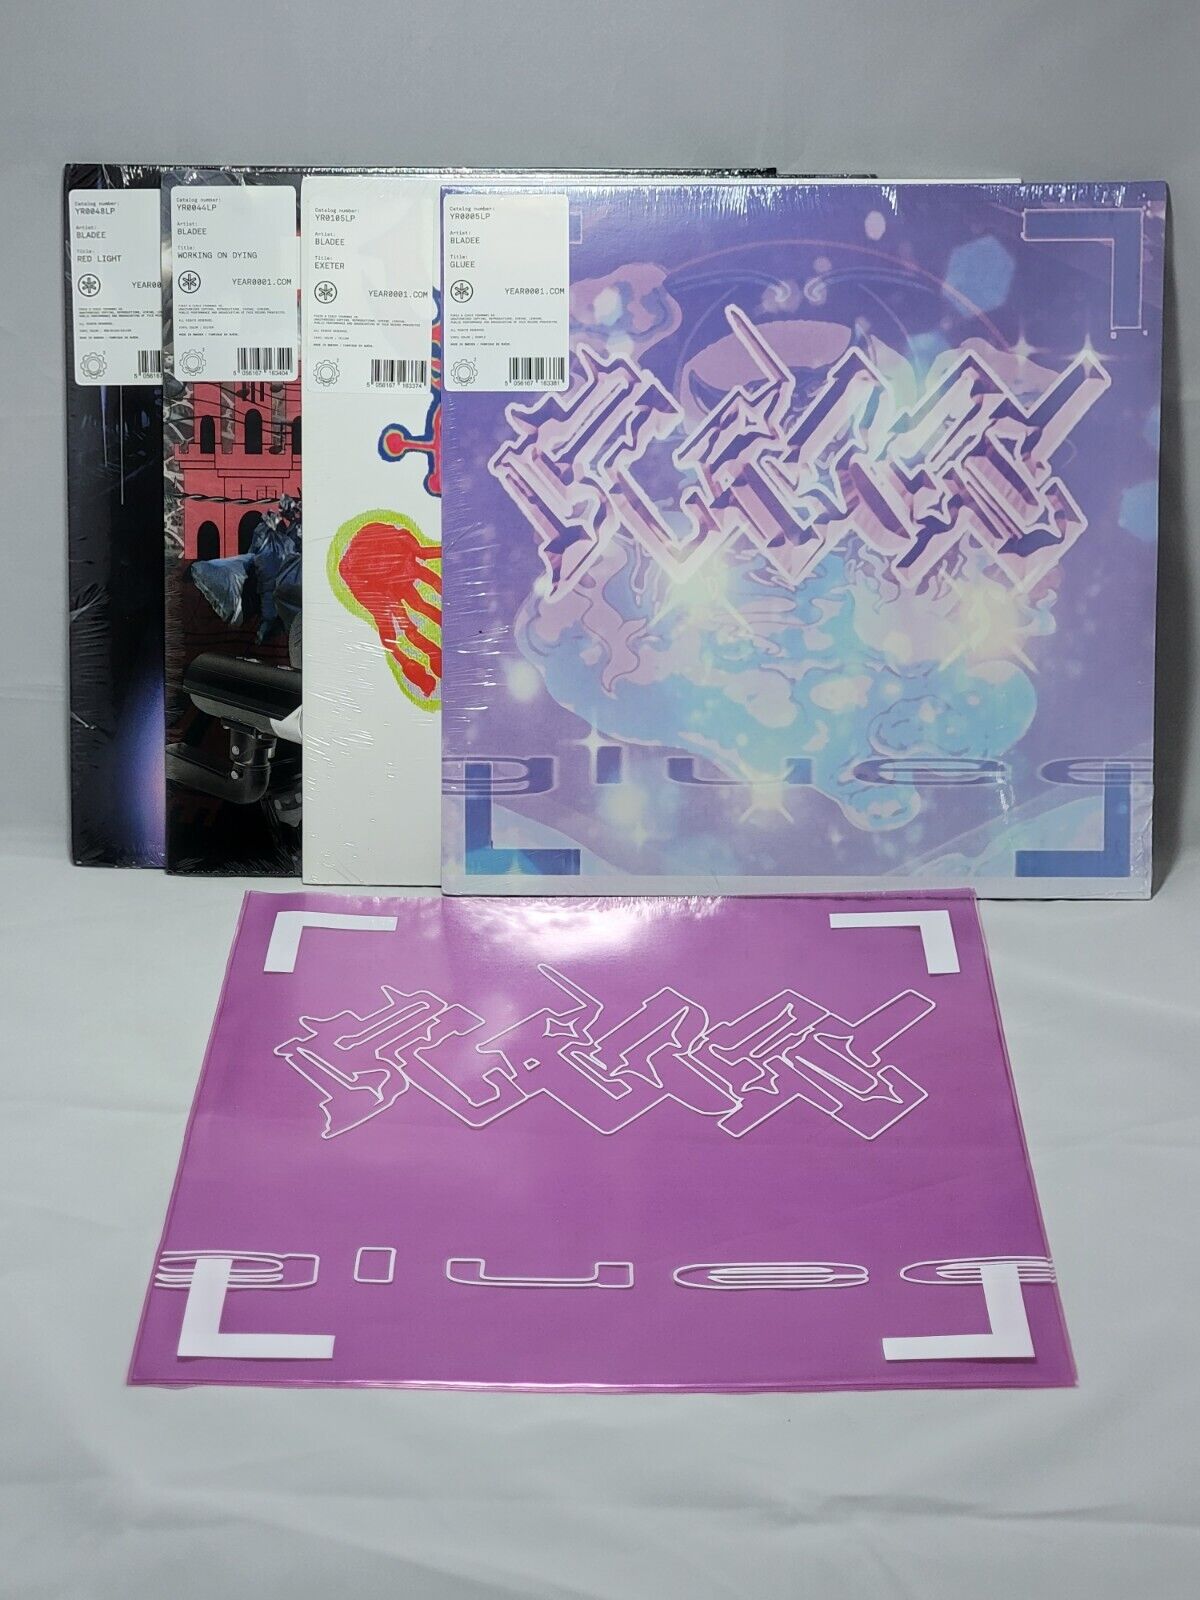 Bladee Vinyl 4X Lot Gluee, Exeter, Working on Dying, Red Light. With PVC Cover 